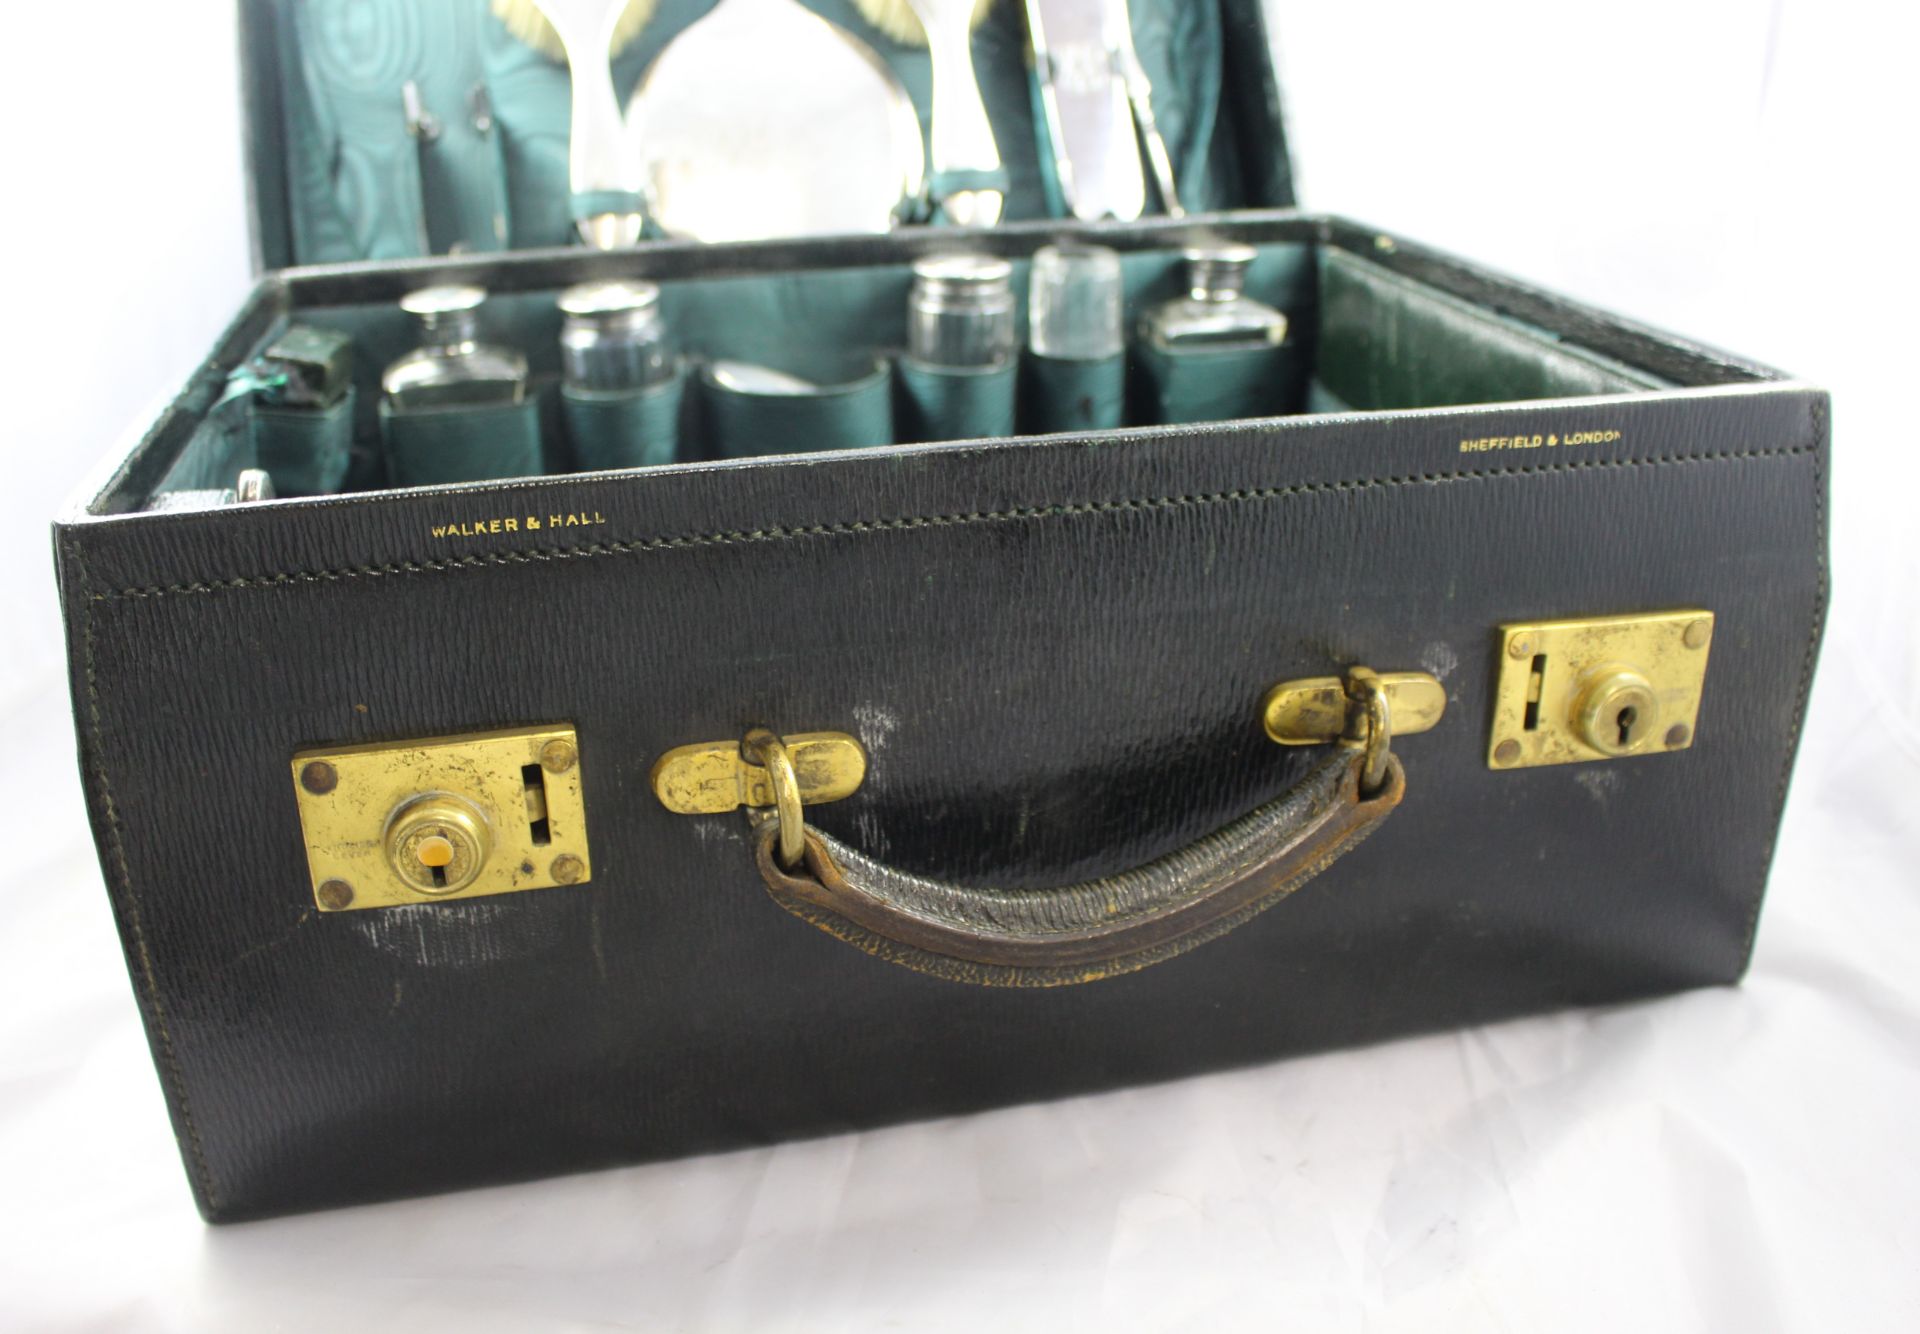 Early 20th c. Cased Silver Travelling Vanity Case by Walker & Hall - Image 11 of 16